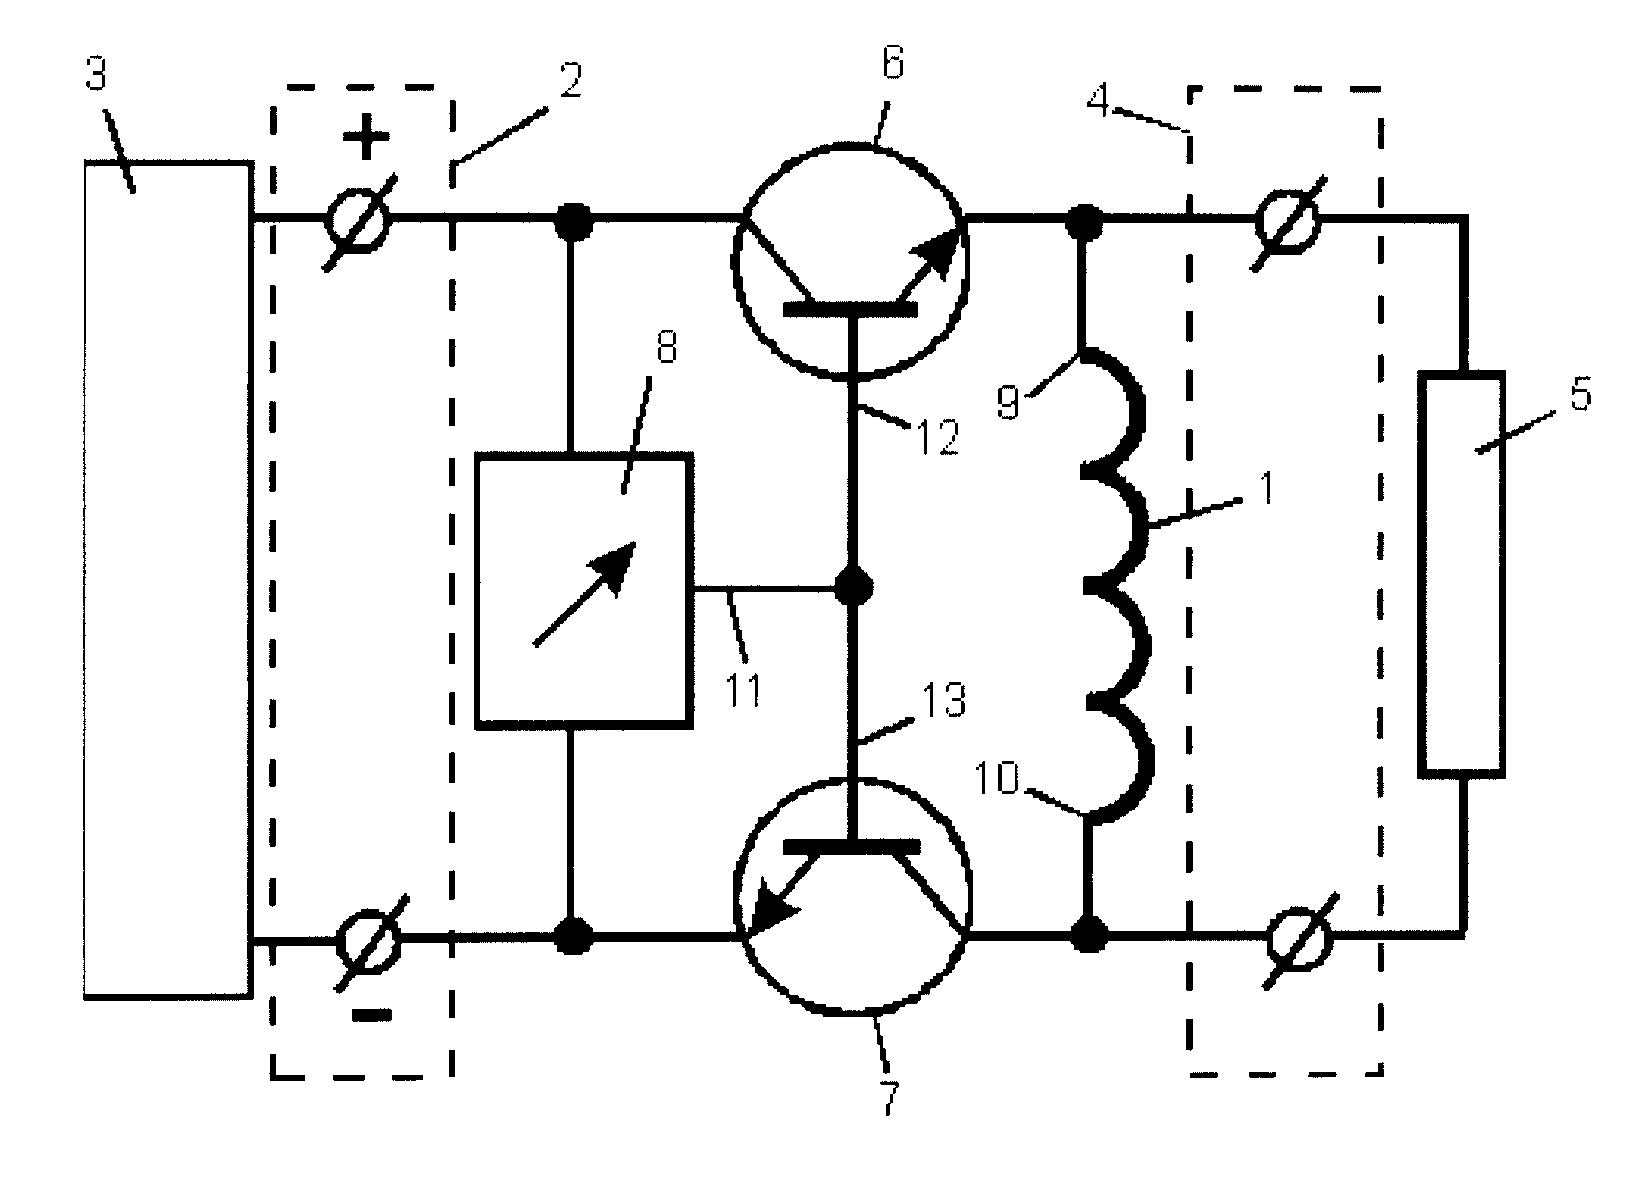 Power supply source for an electric heating system